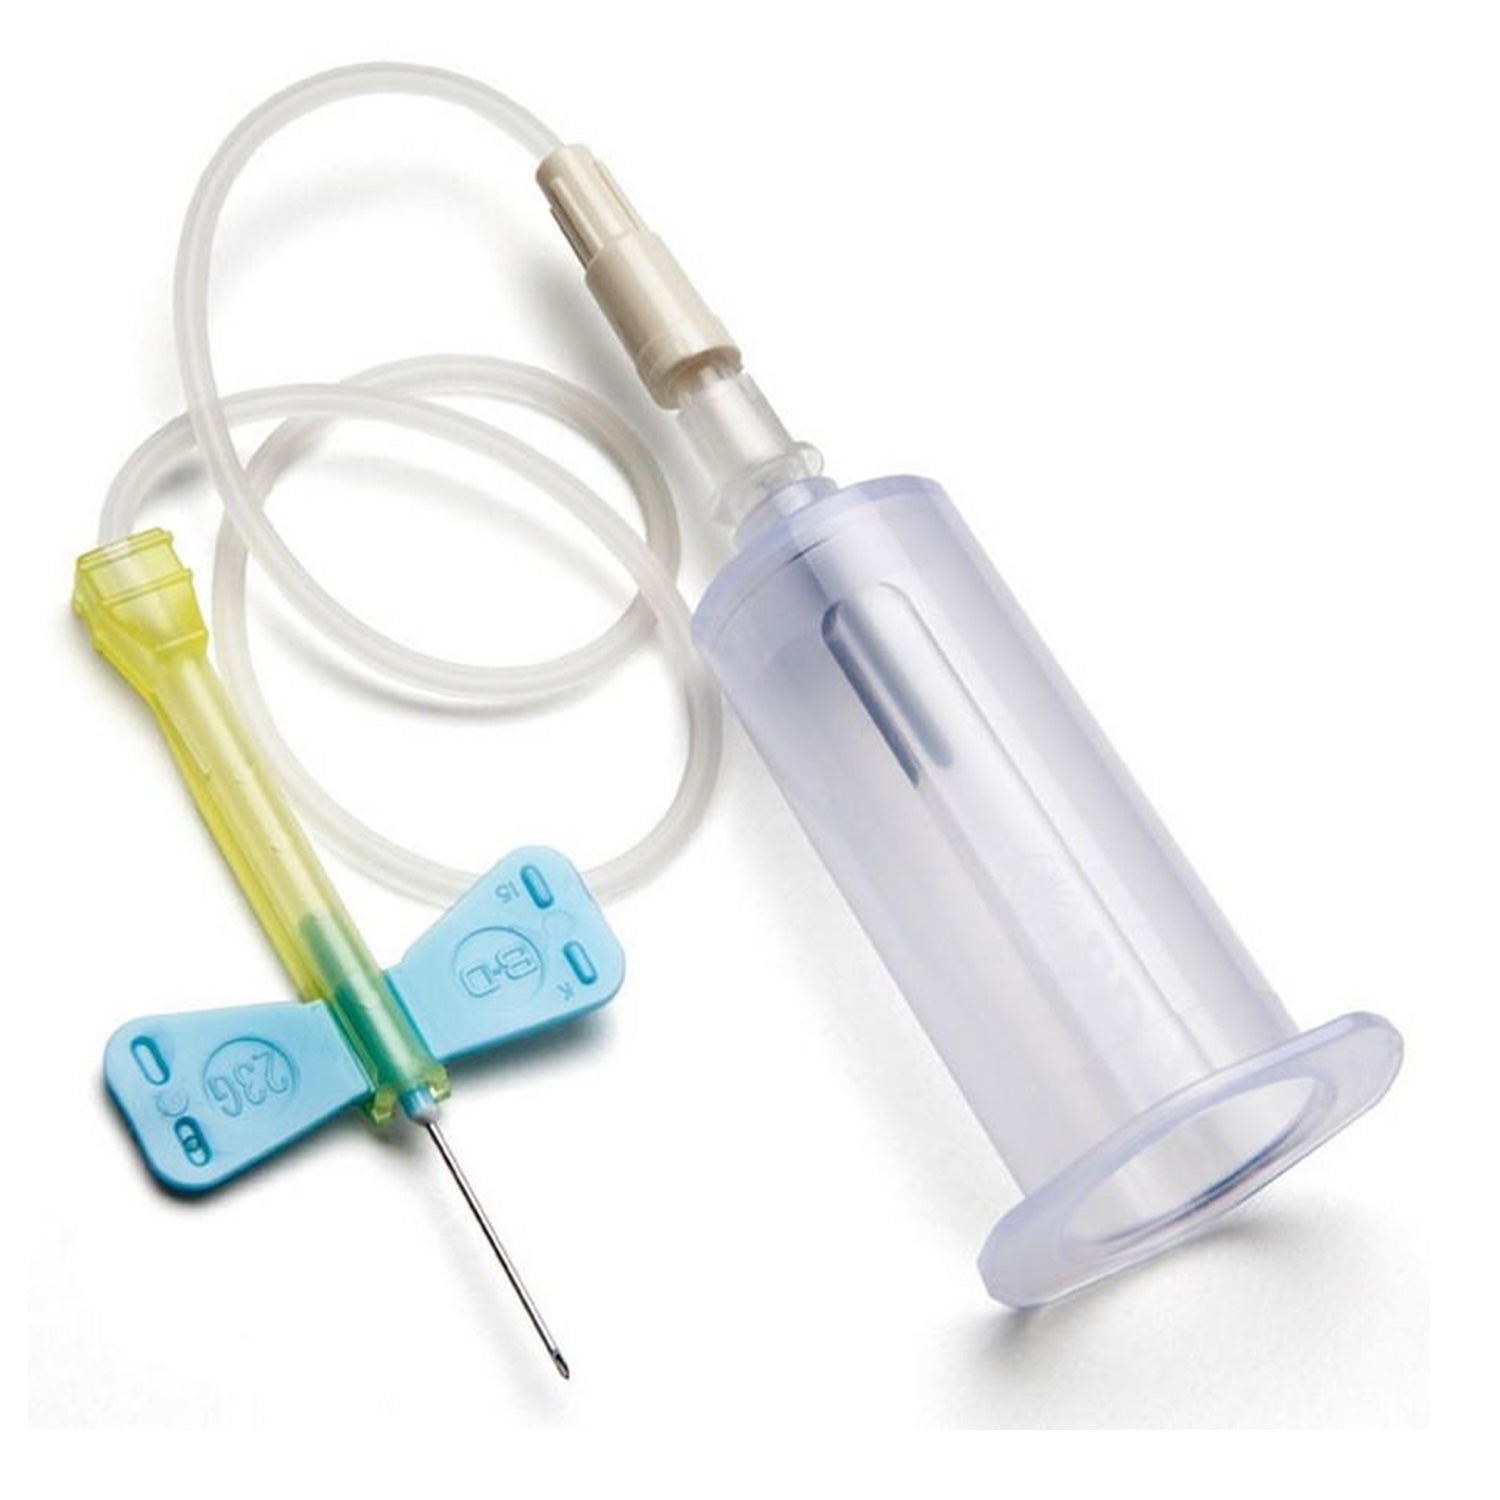 BD Vacutainer Safety Lok Blood Collection System with Pre-attached Holder | 0.75" Needle | 23G x 7" Tubing | Pack of 25 (2)